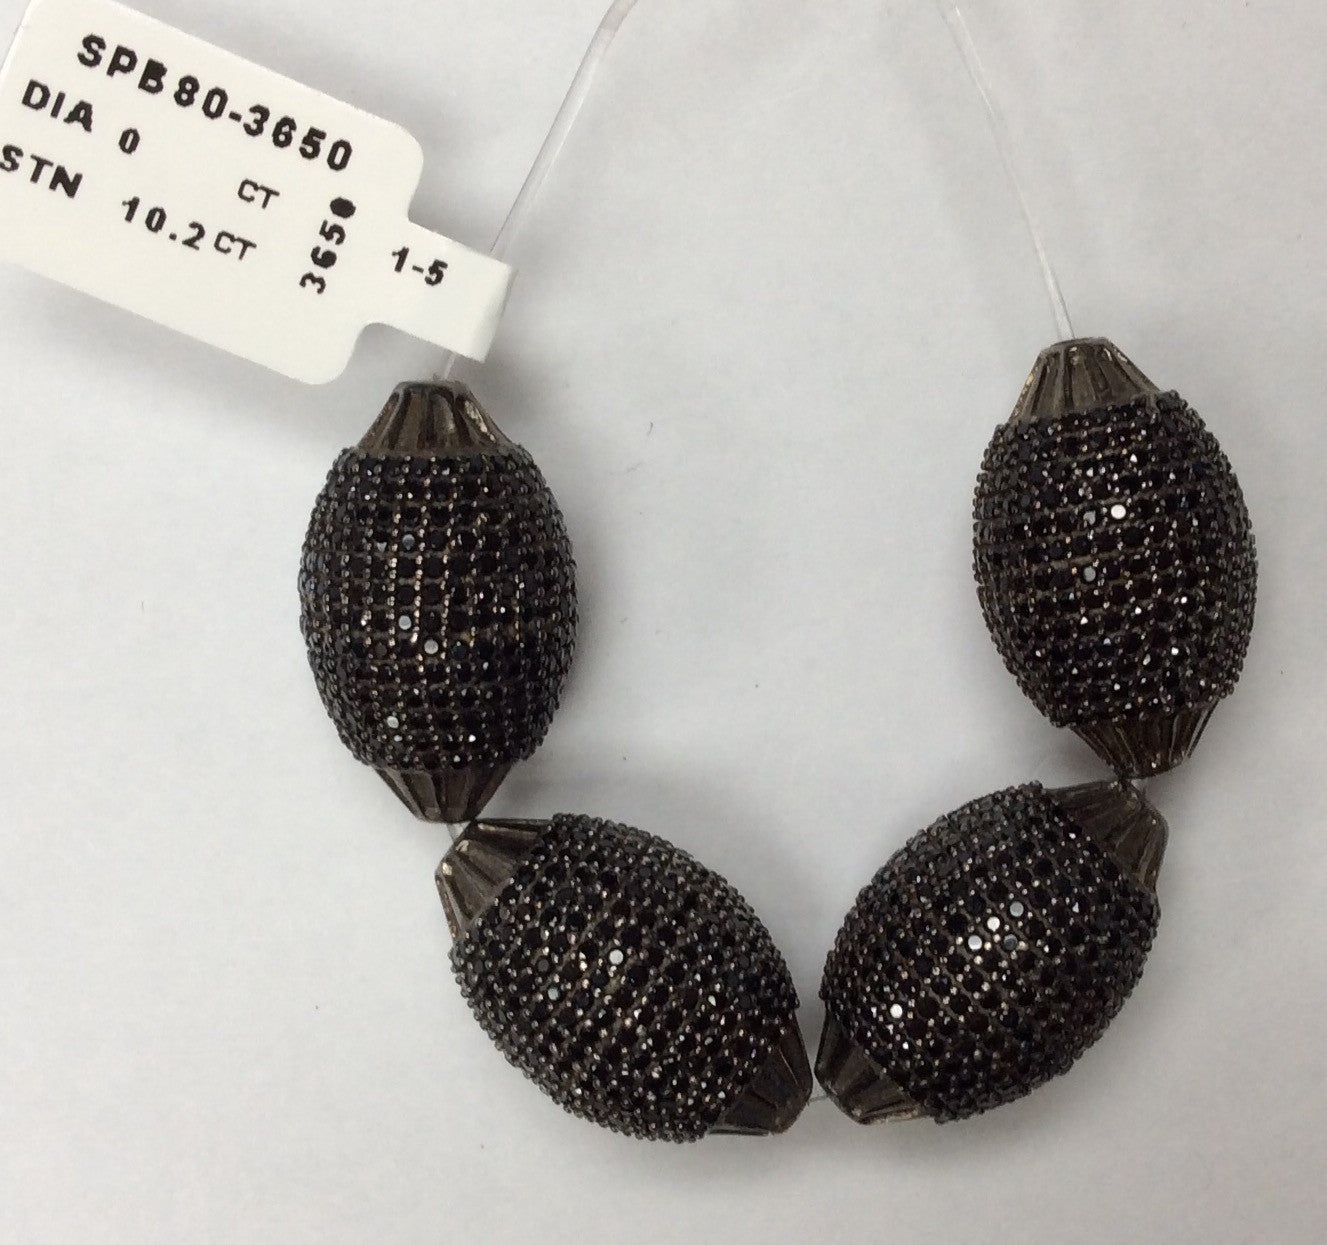 Oval Shaped Black Spinel Bead